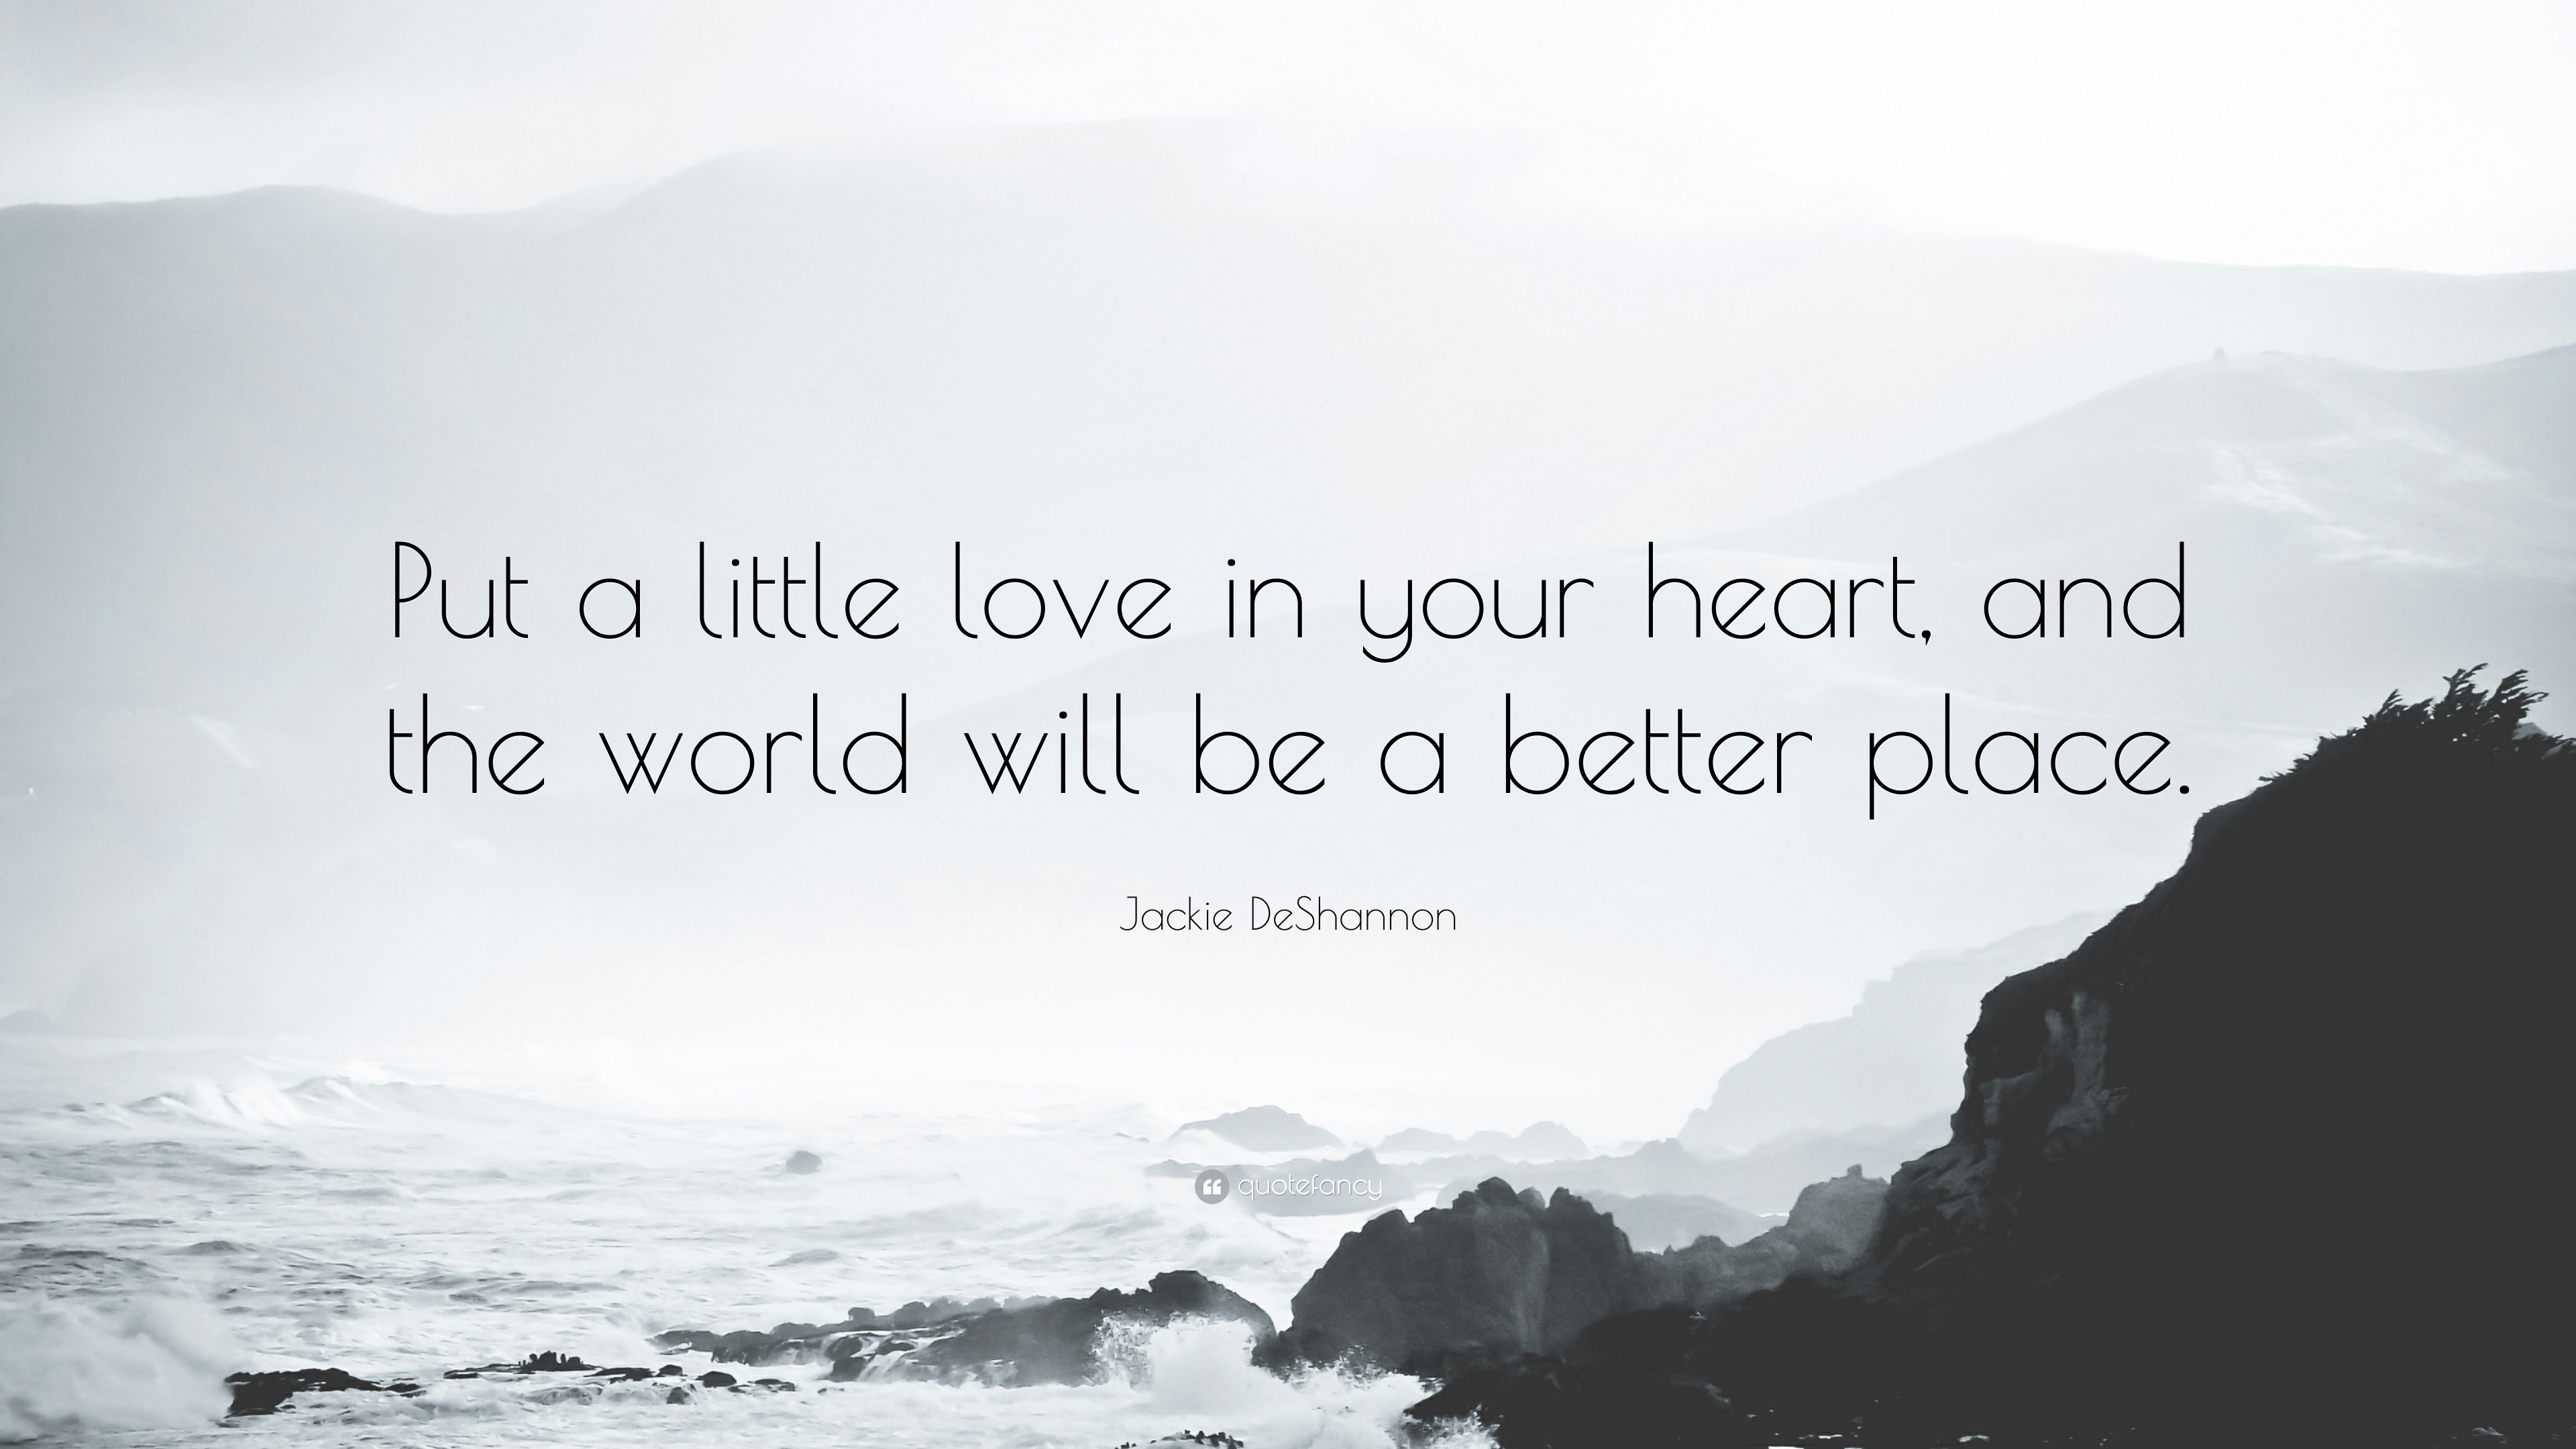 Jackie DeShannon Quote “Put a little love in your heart and the world